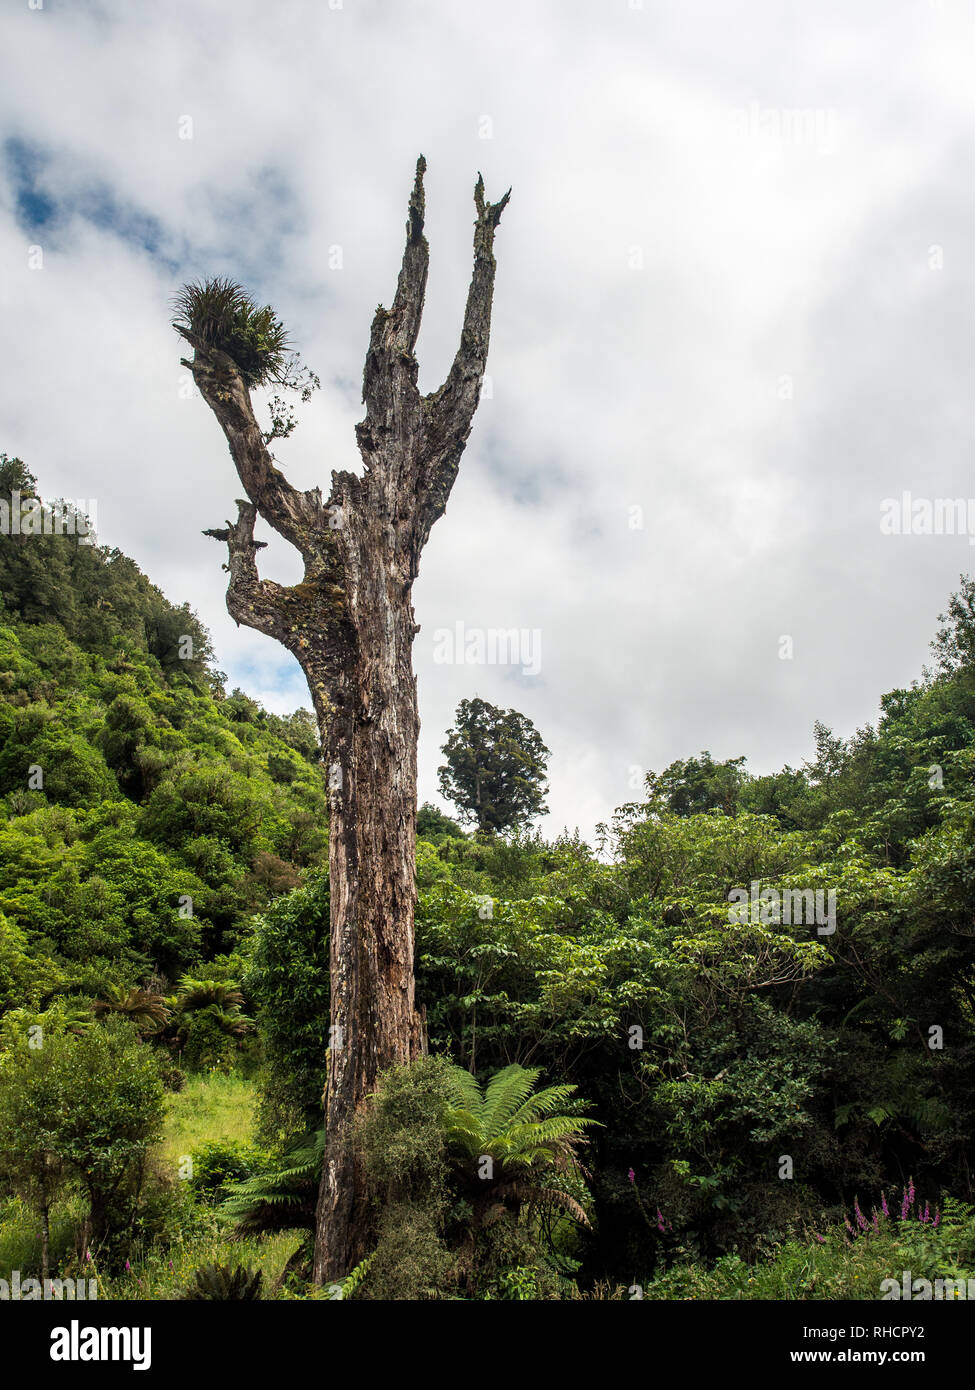 Trunk of dead tree with epiphytes growing on it, standing above regenerating forest, Te Urewera, North Island, New Zealand Stock Photo